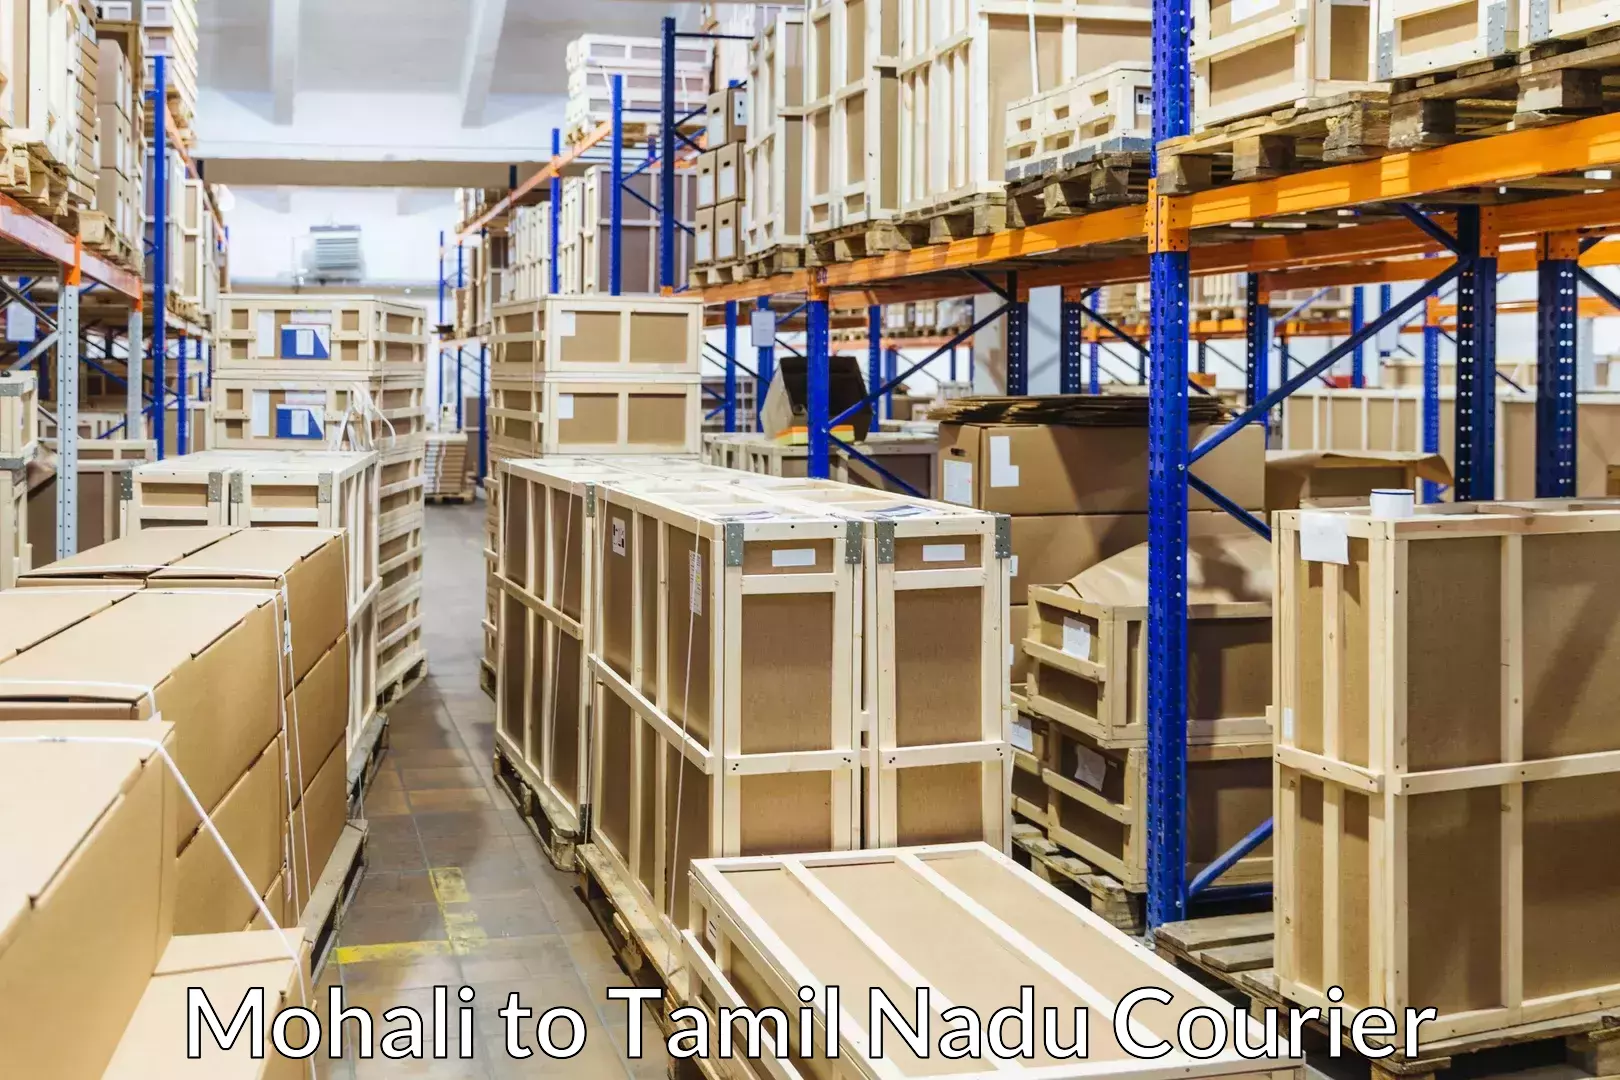 Furniture transport specialists Mohali to Cuddalore